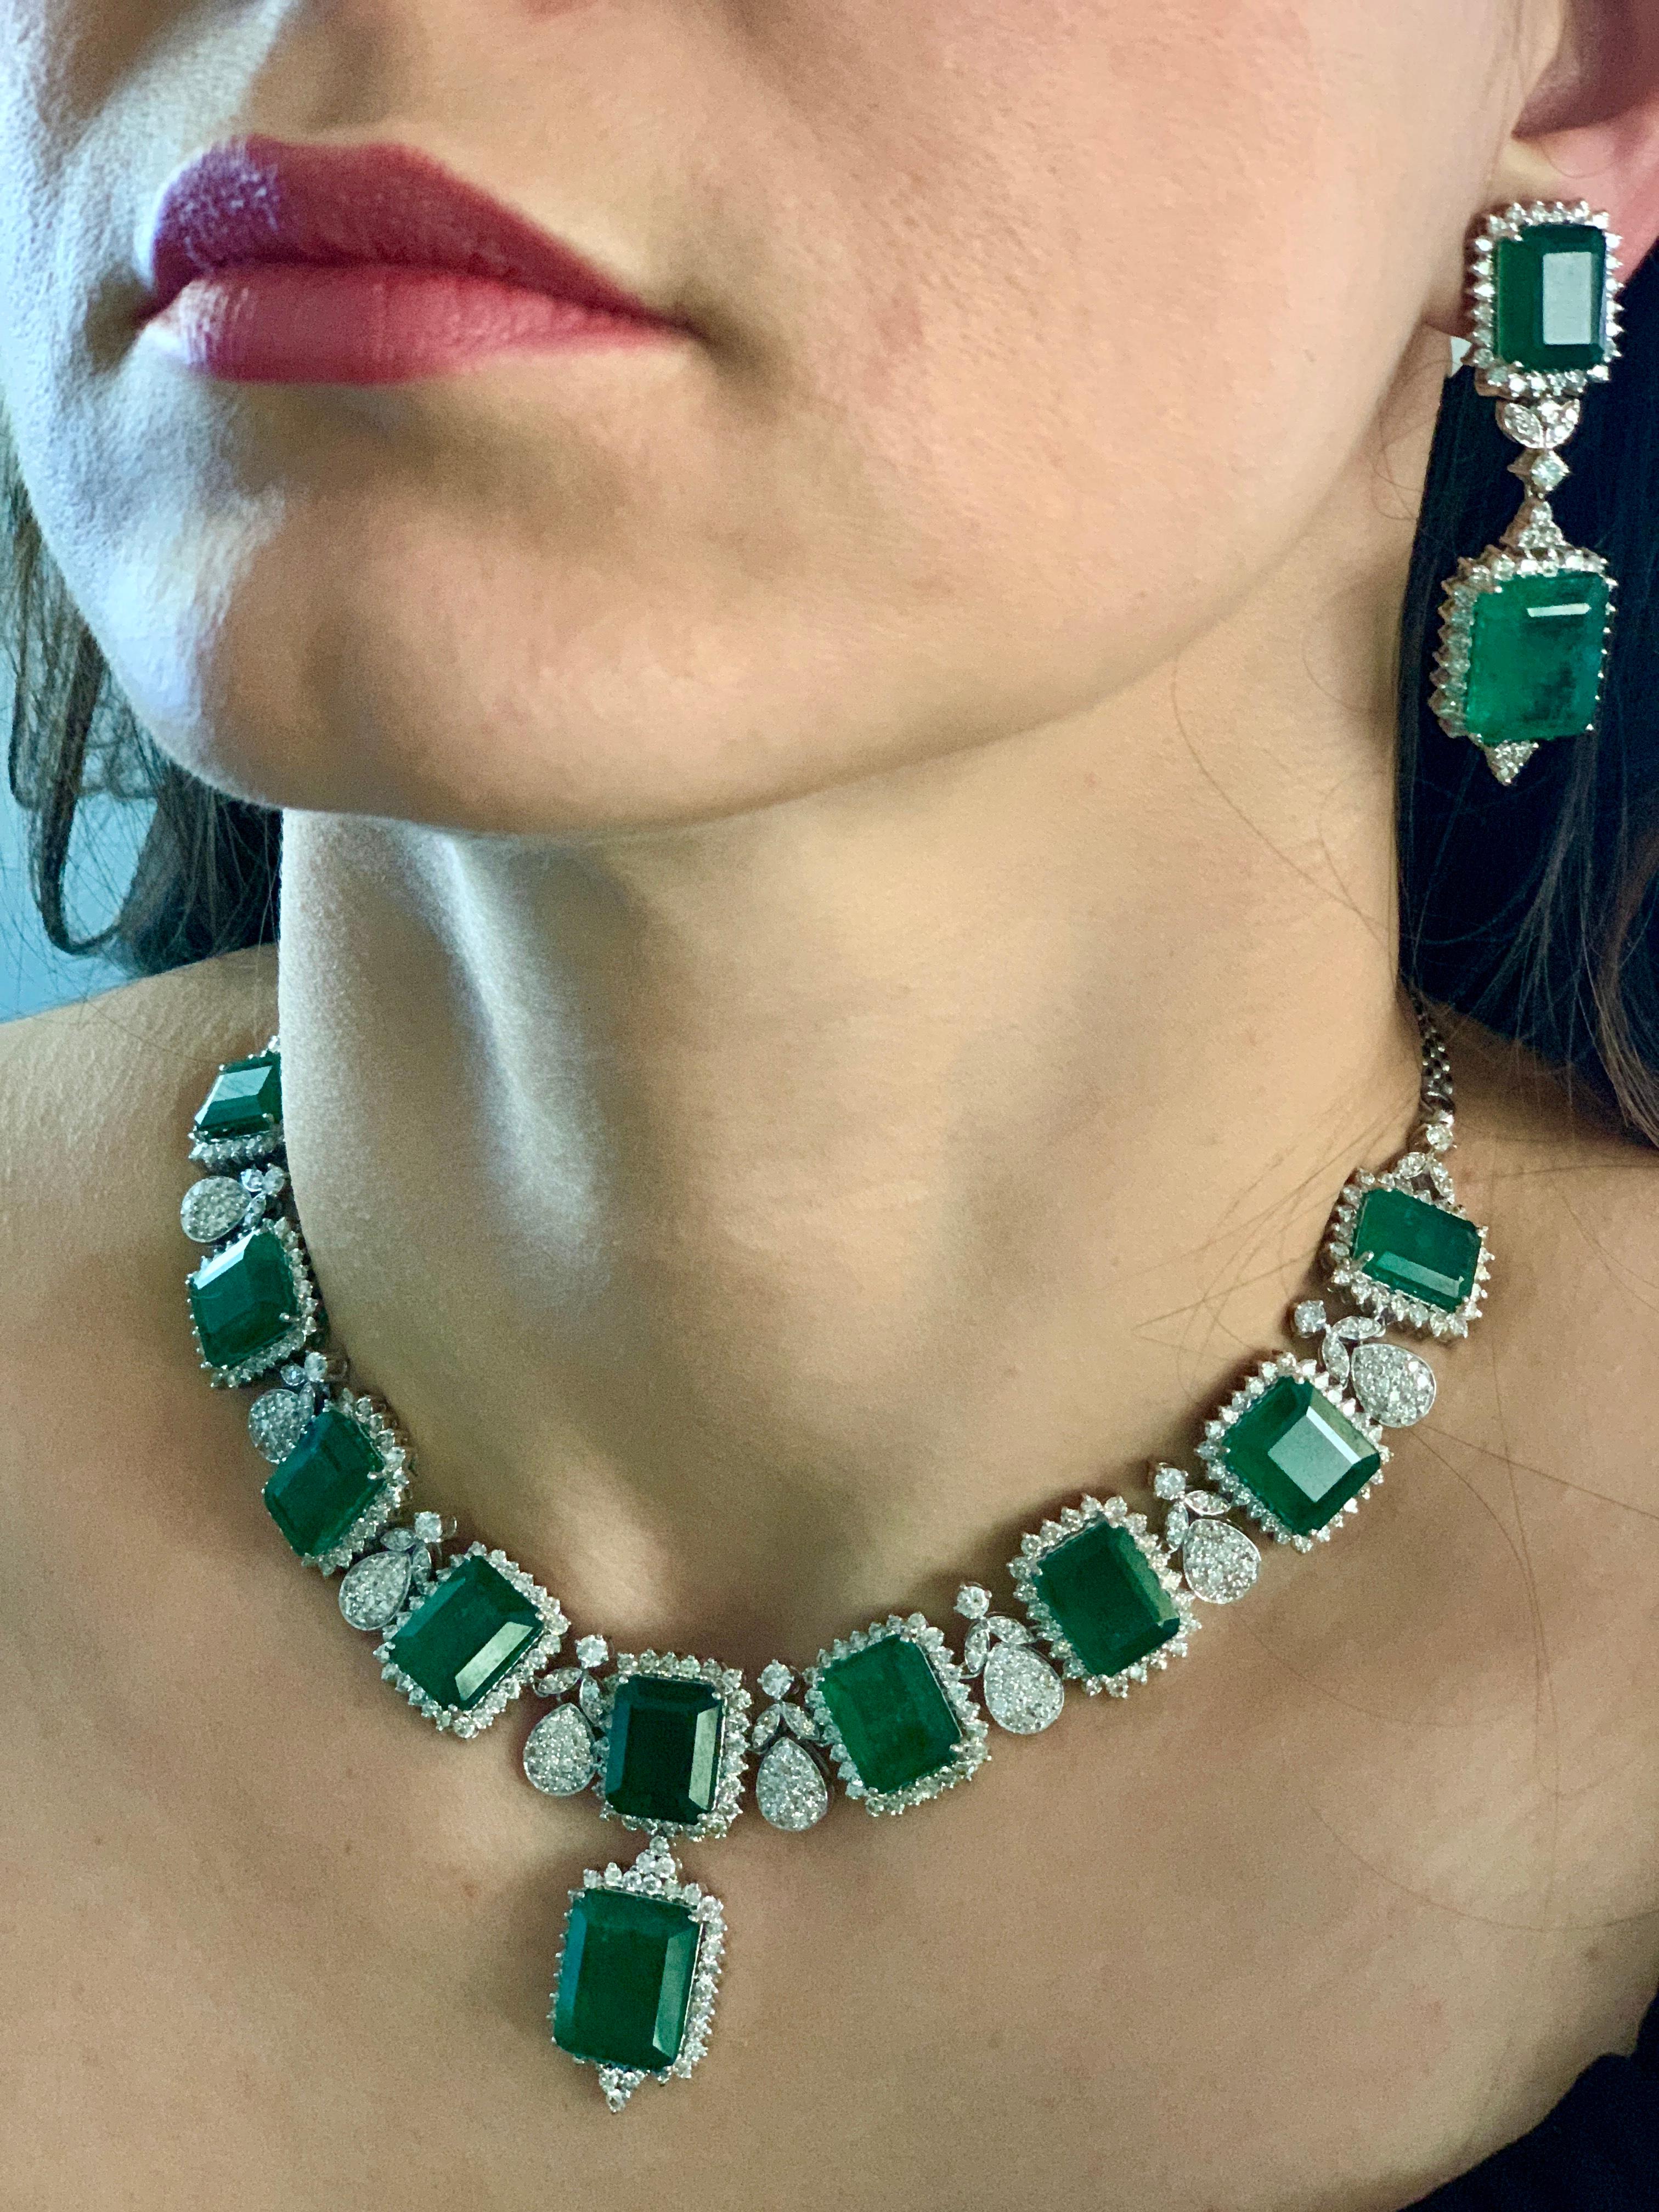 GIA Certified 135 Ct Emerald and 28 Ct Diamond Necklace and Earring Bridal Suite 11